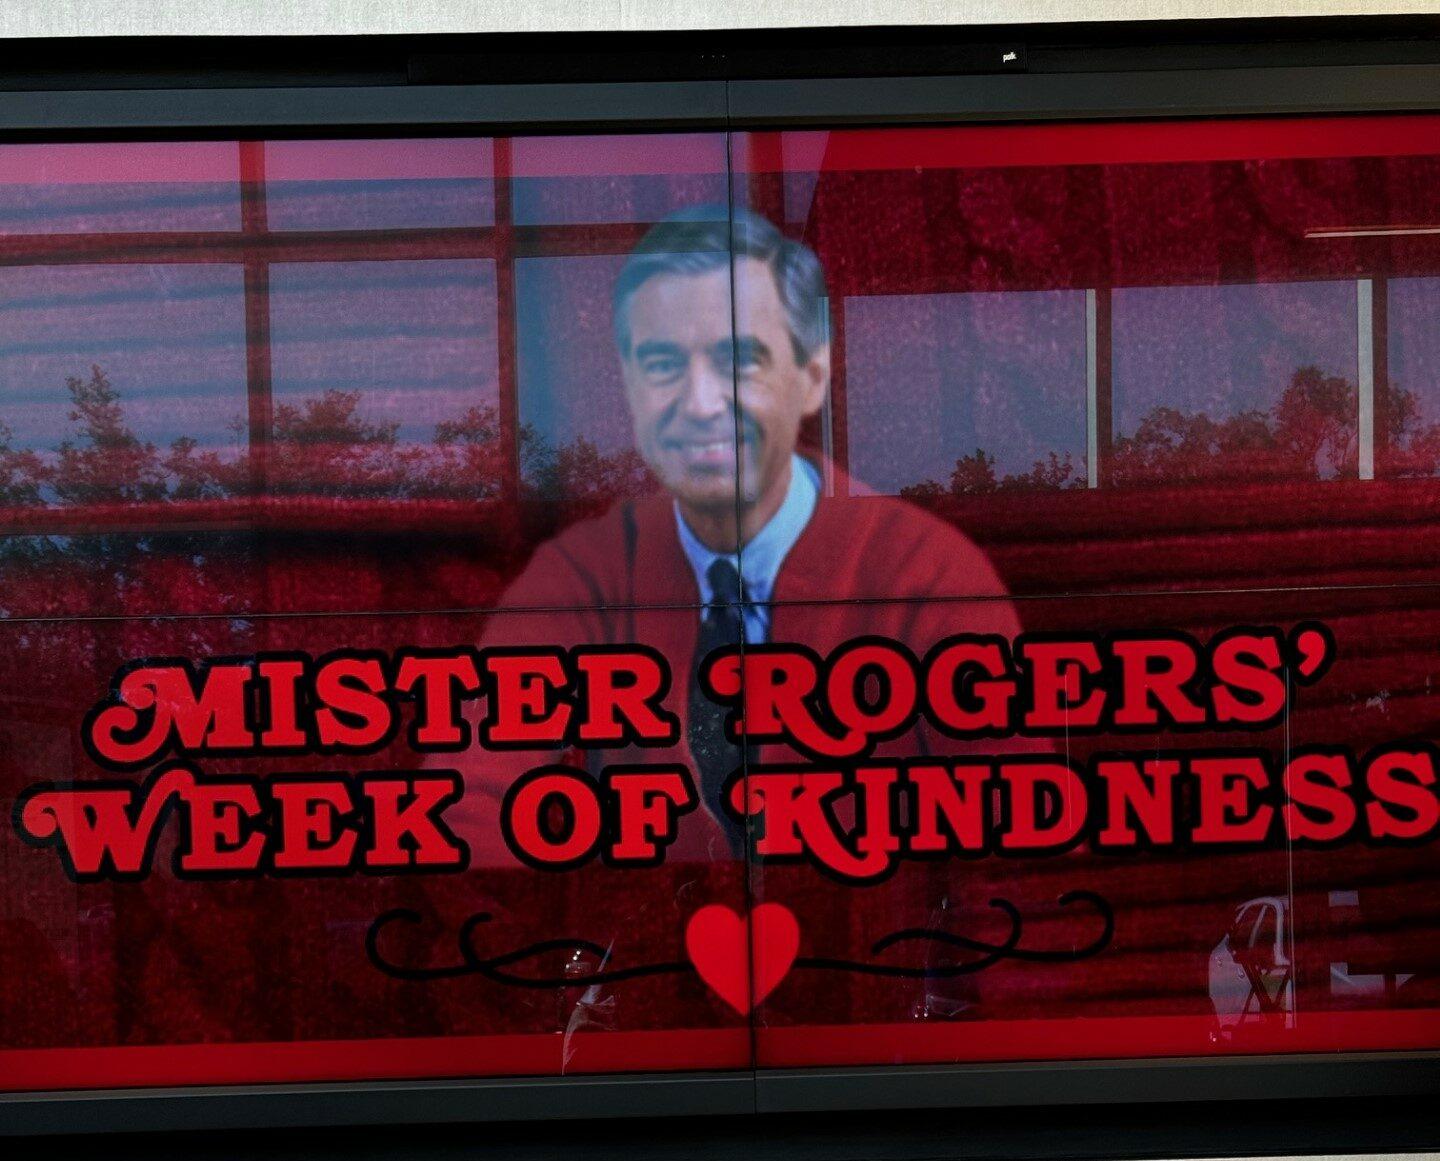 Photo of Mister Rogers Week of Kindness framed portrait at the Edyth Busch Charitable Foundation.